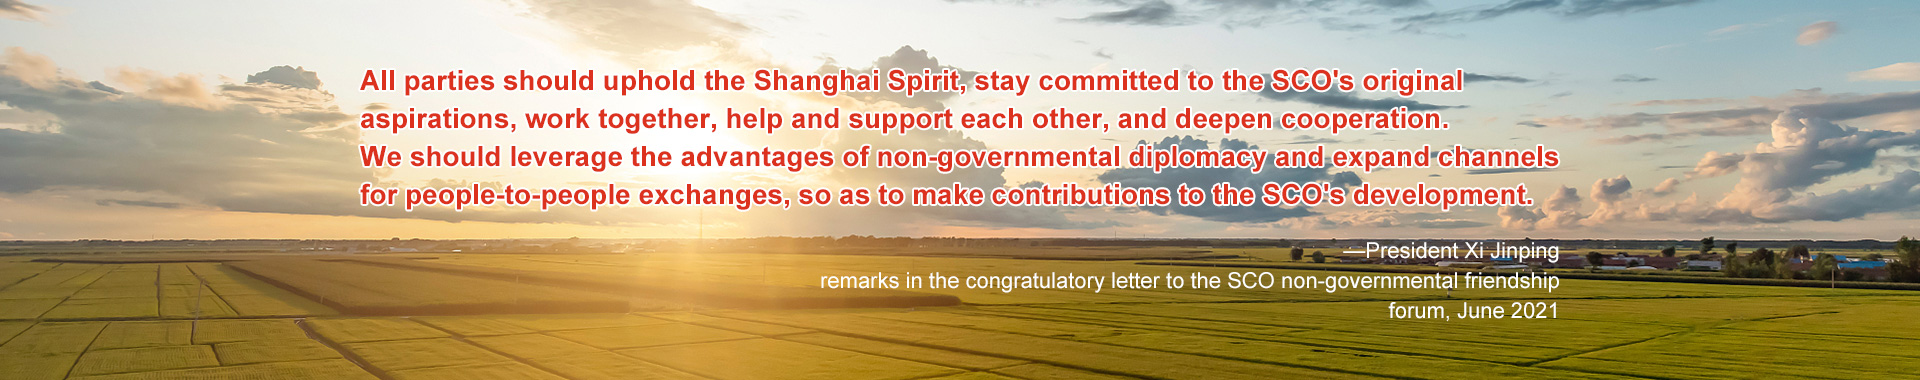 President Xi Jinping  remarks in the congratulatory letter to the SCO non-governmental friendship forum